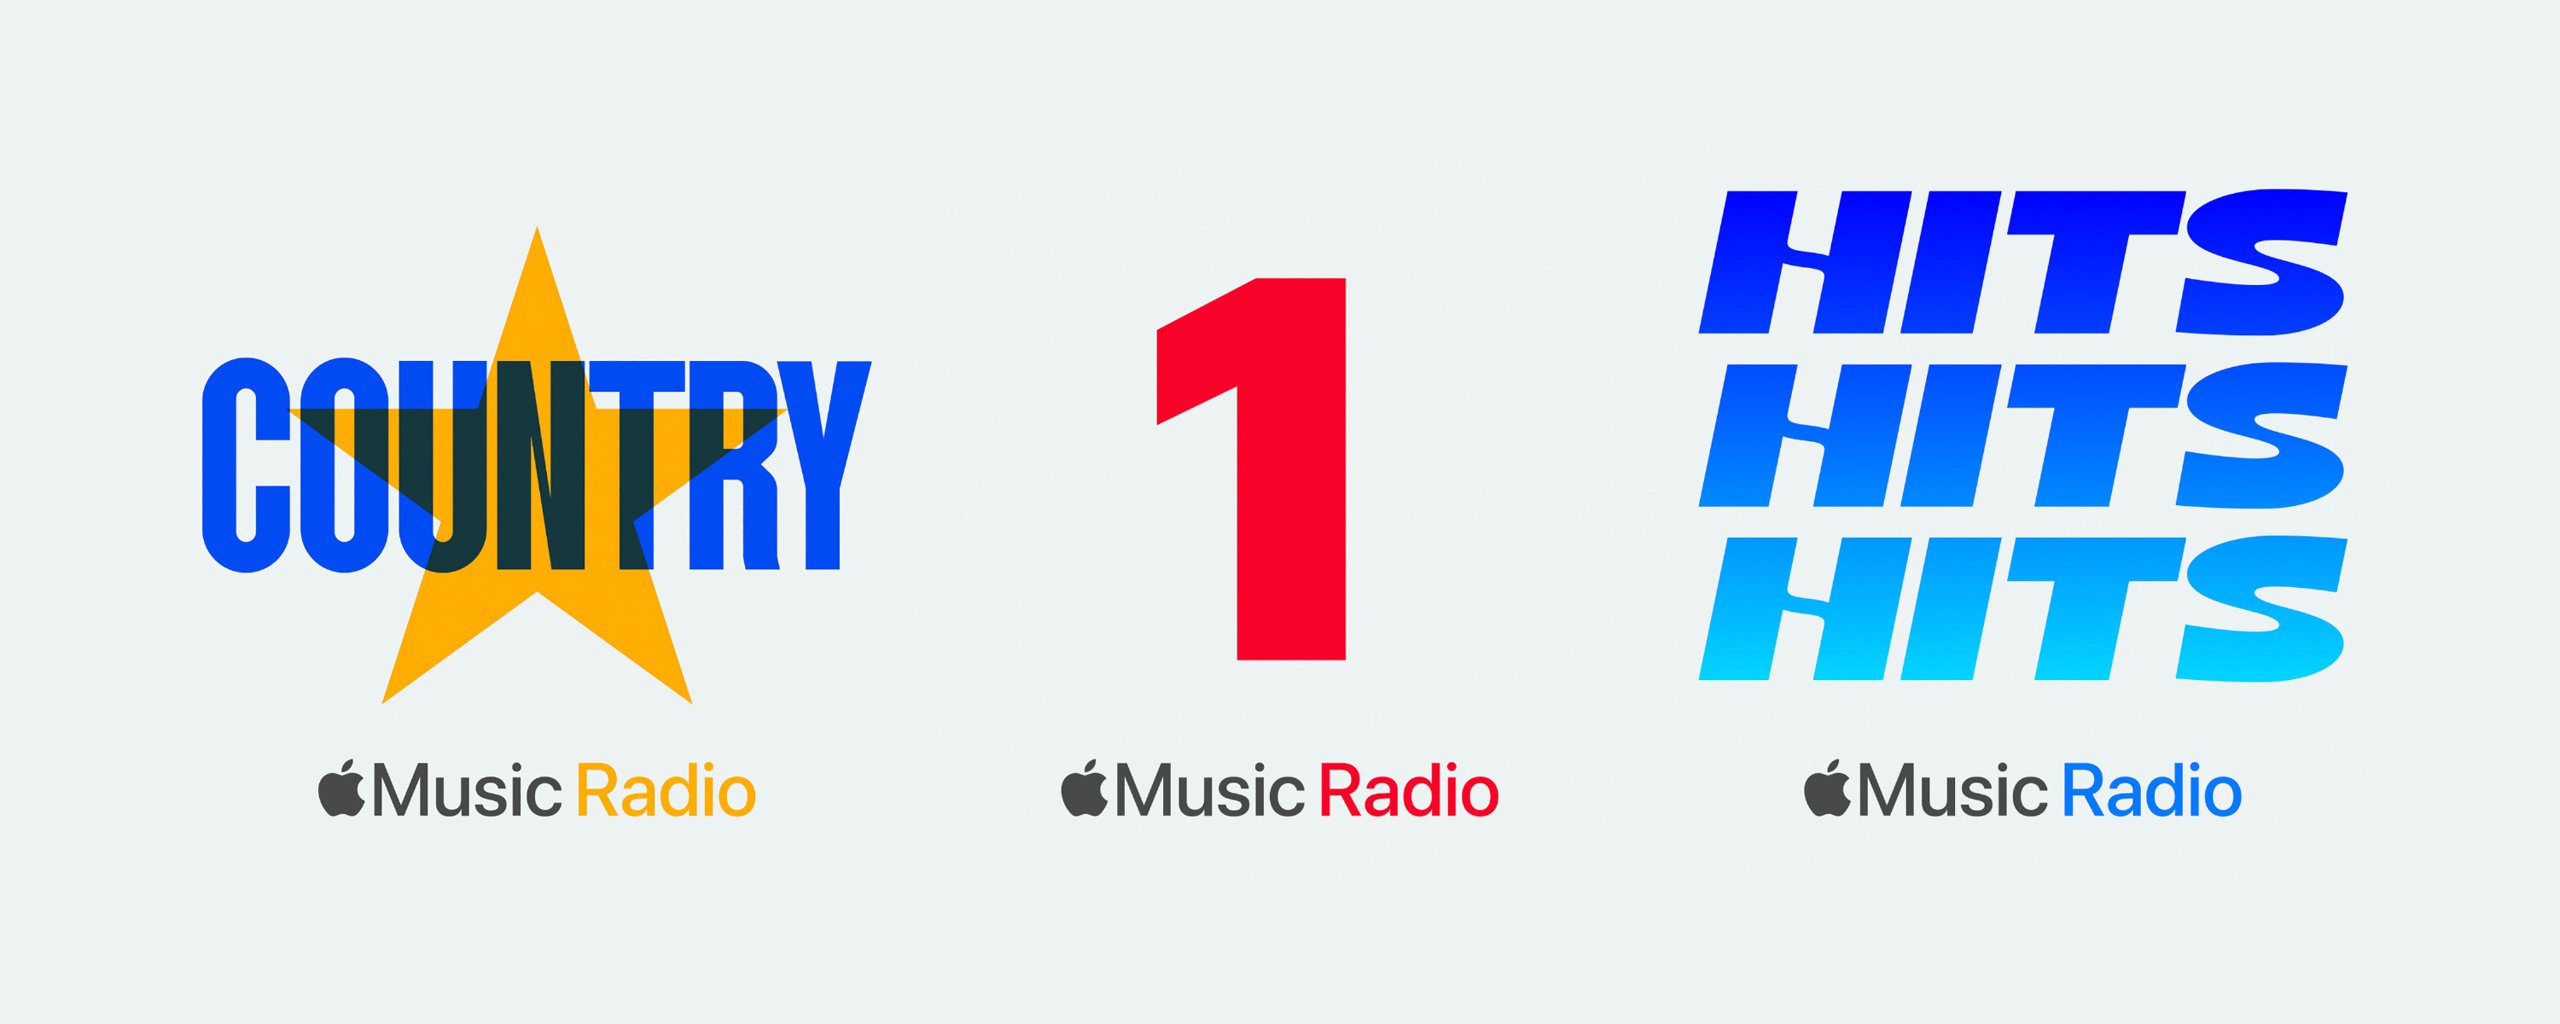 Post Banner for Apple Launches Apple Music Radio w/ Three Stations: Apple Music 1, Apple Music Hits, and Apple Music Country